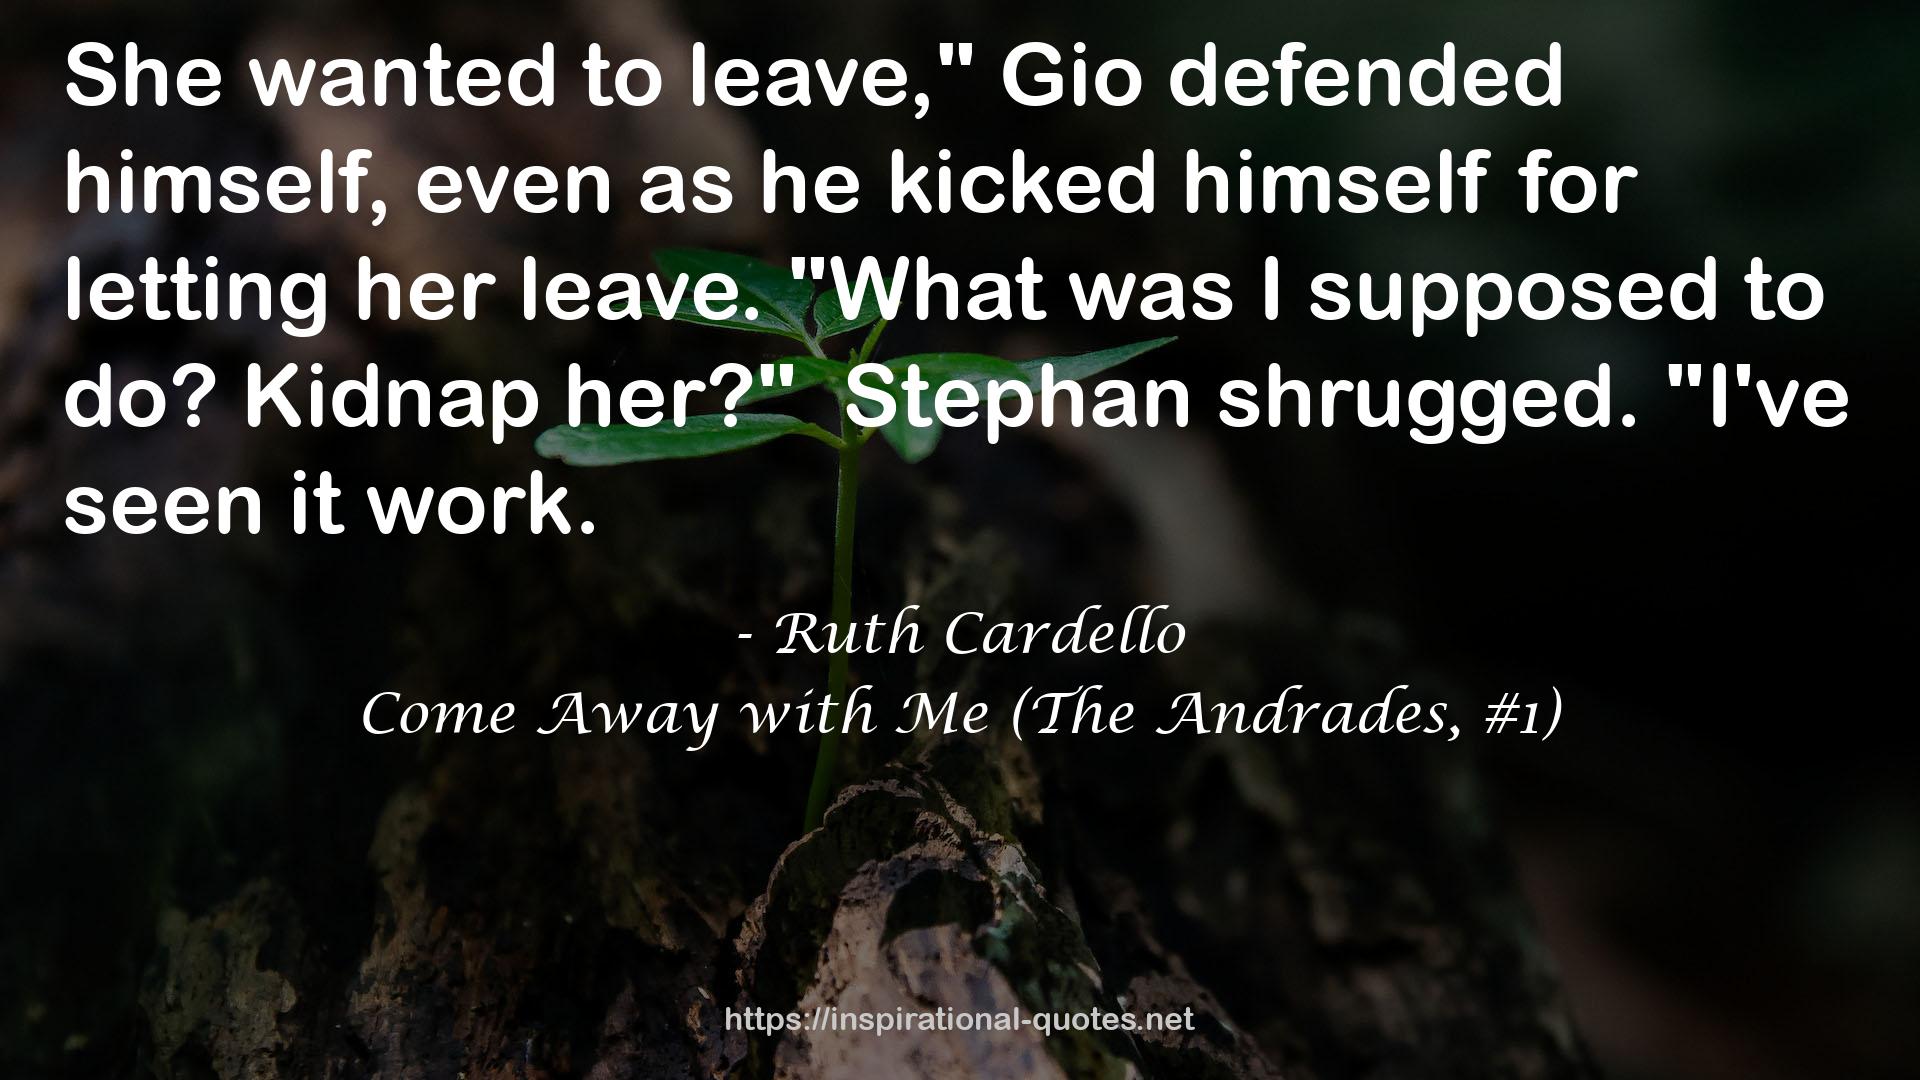 Come Away with Me (The Andrades, #1) QUOTES